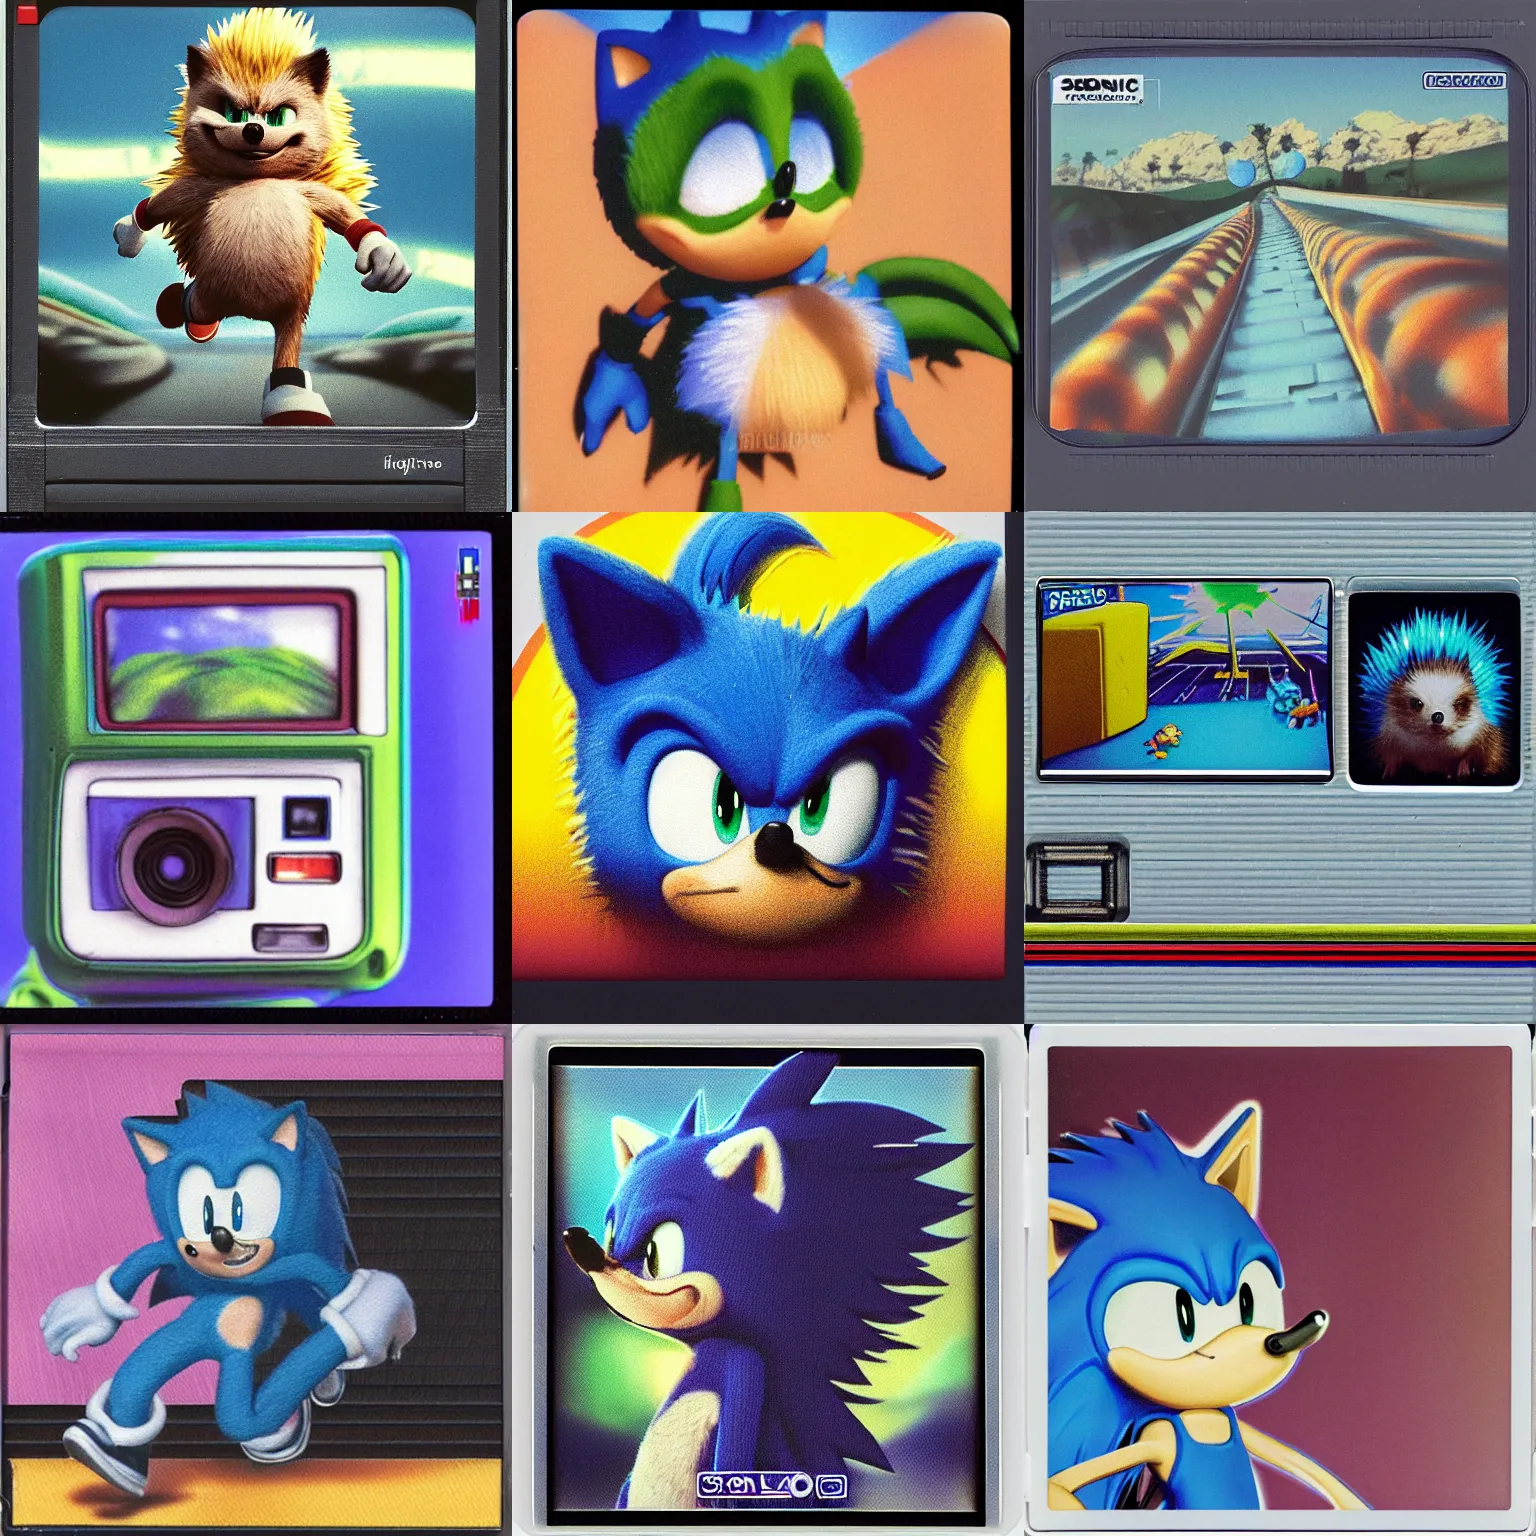 Prompt: polaroid instax portrait of sonic hedgehog and a matte painting landscape of a surreal, sharp, detailed professional, soft pastels, high quality airbrush art album cover of a liquid dissolving airbrush art lsd dmt sonic the hedgehog swimming through cyberspace, holo checkerboard background, 1 9 9 0 s 1 9 9 2 sega genesis rareware video game album cover